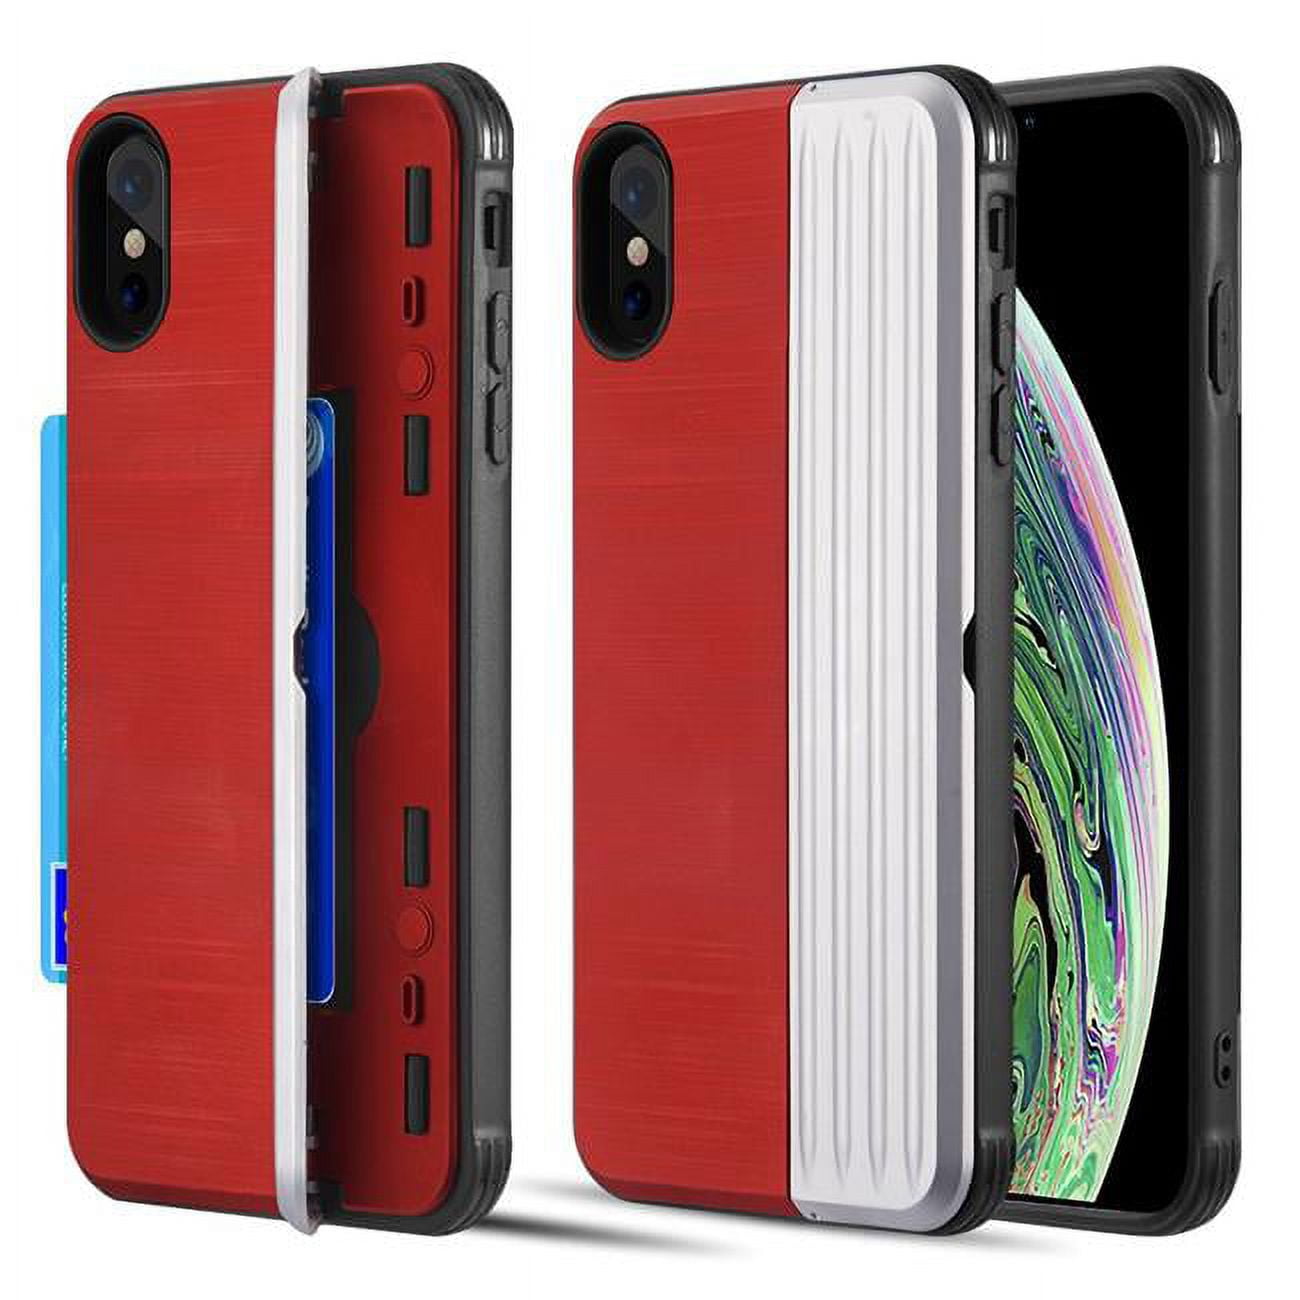 TCAIPXS-KARD-RDSL The Kard Dual Hybrid Case with Card Slot & Magnetic Closure for iPhone XS & X - Red & Silver -  Dream Wireless